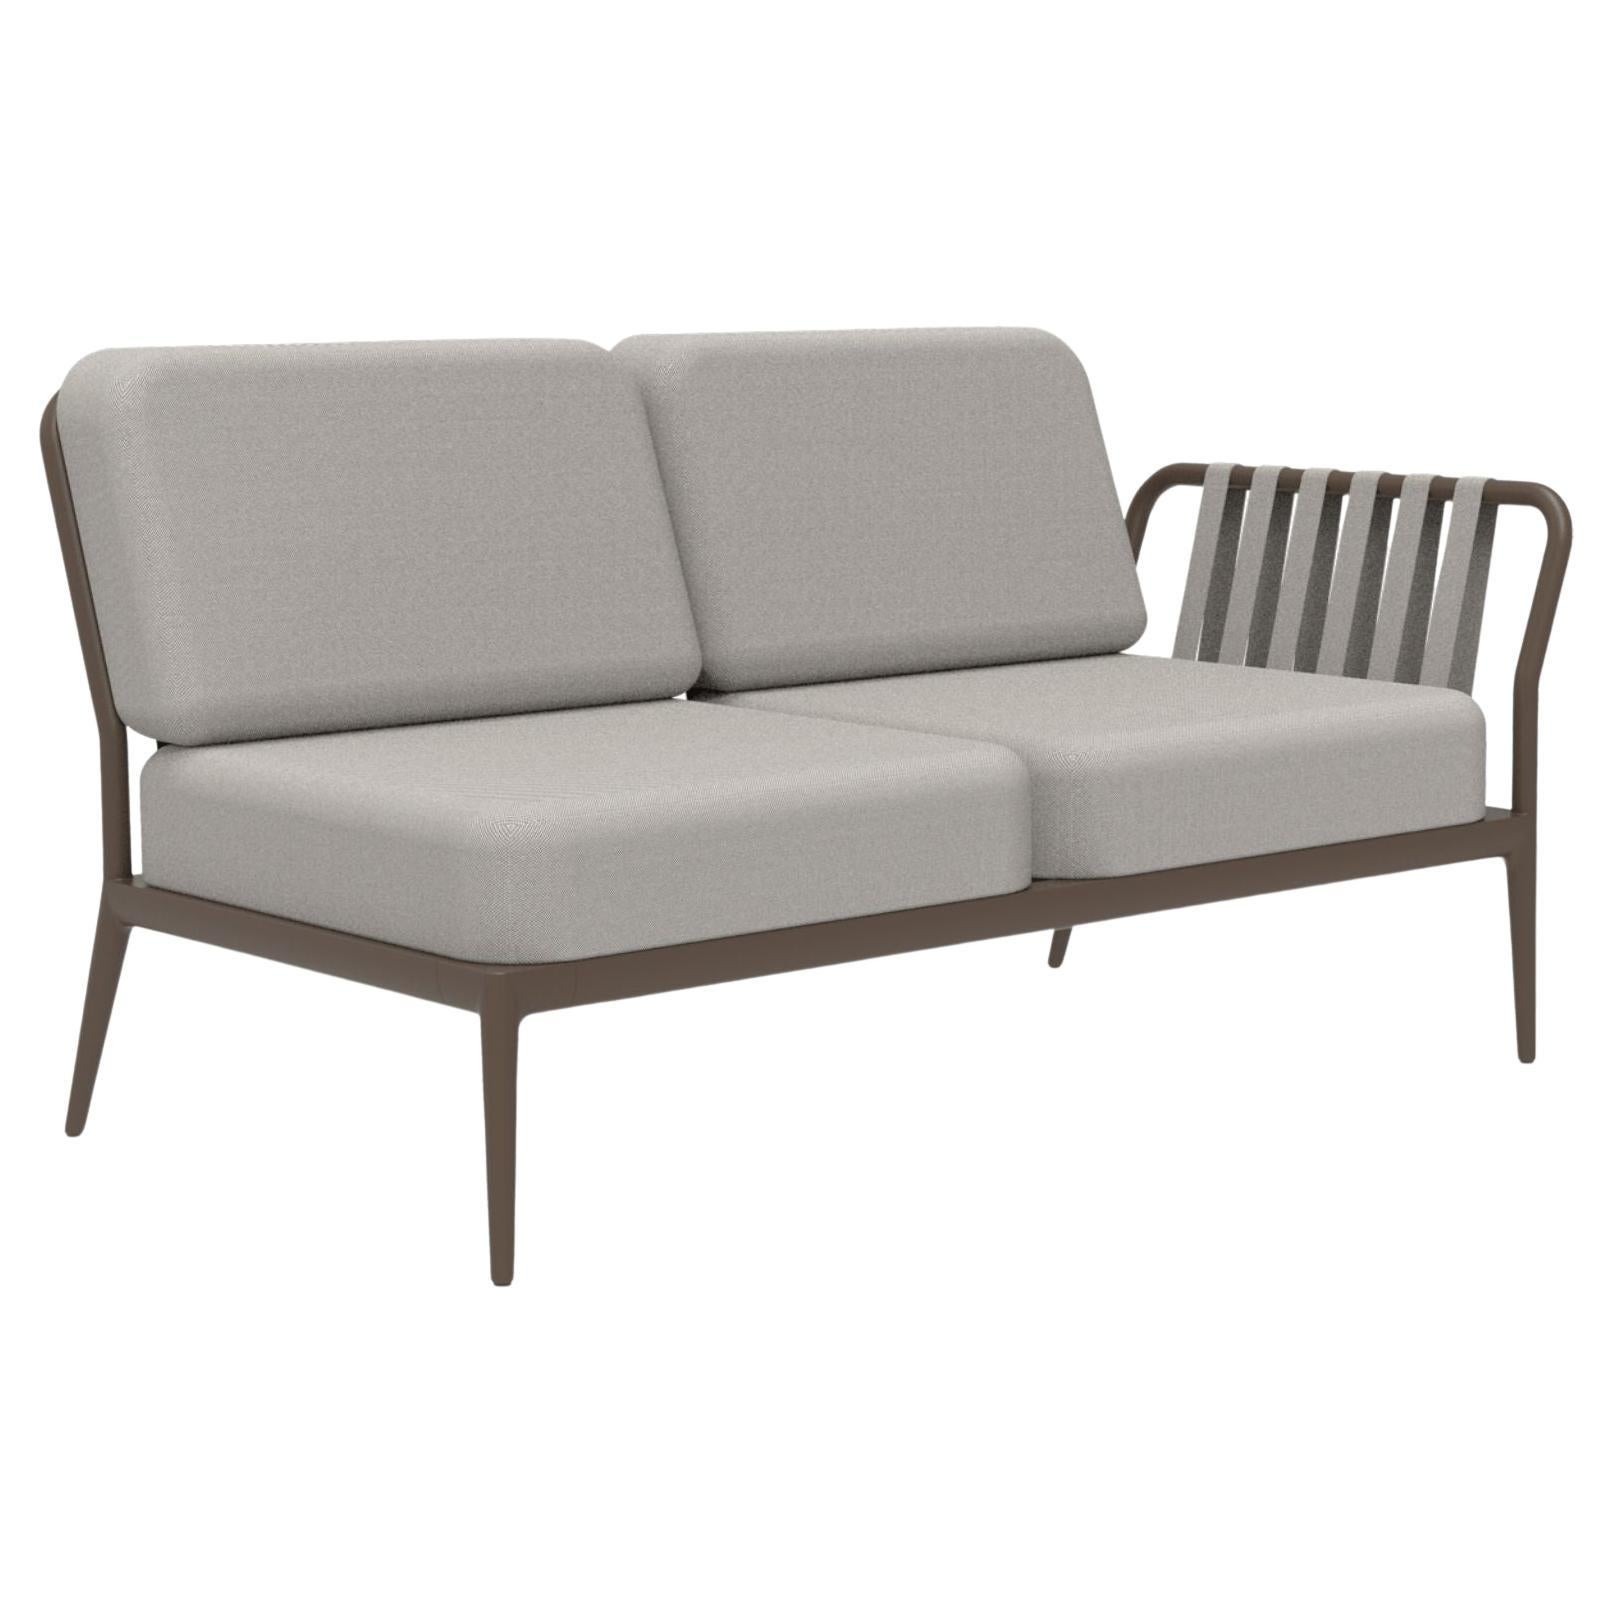 Ribbons Bronze Double Left Modular Sofa by Mowee For Sale